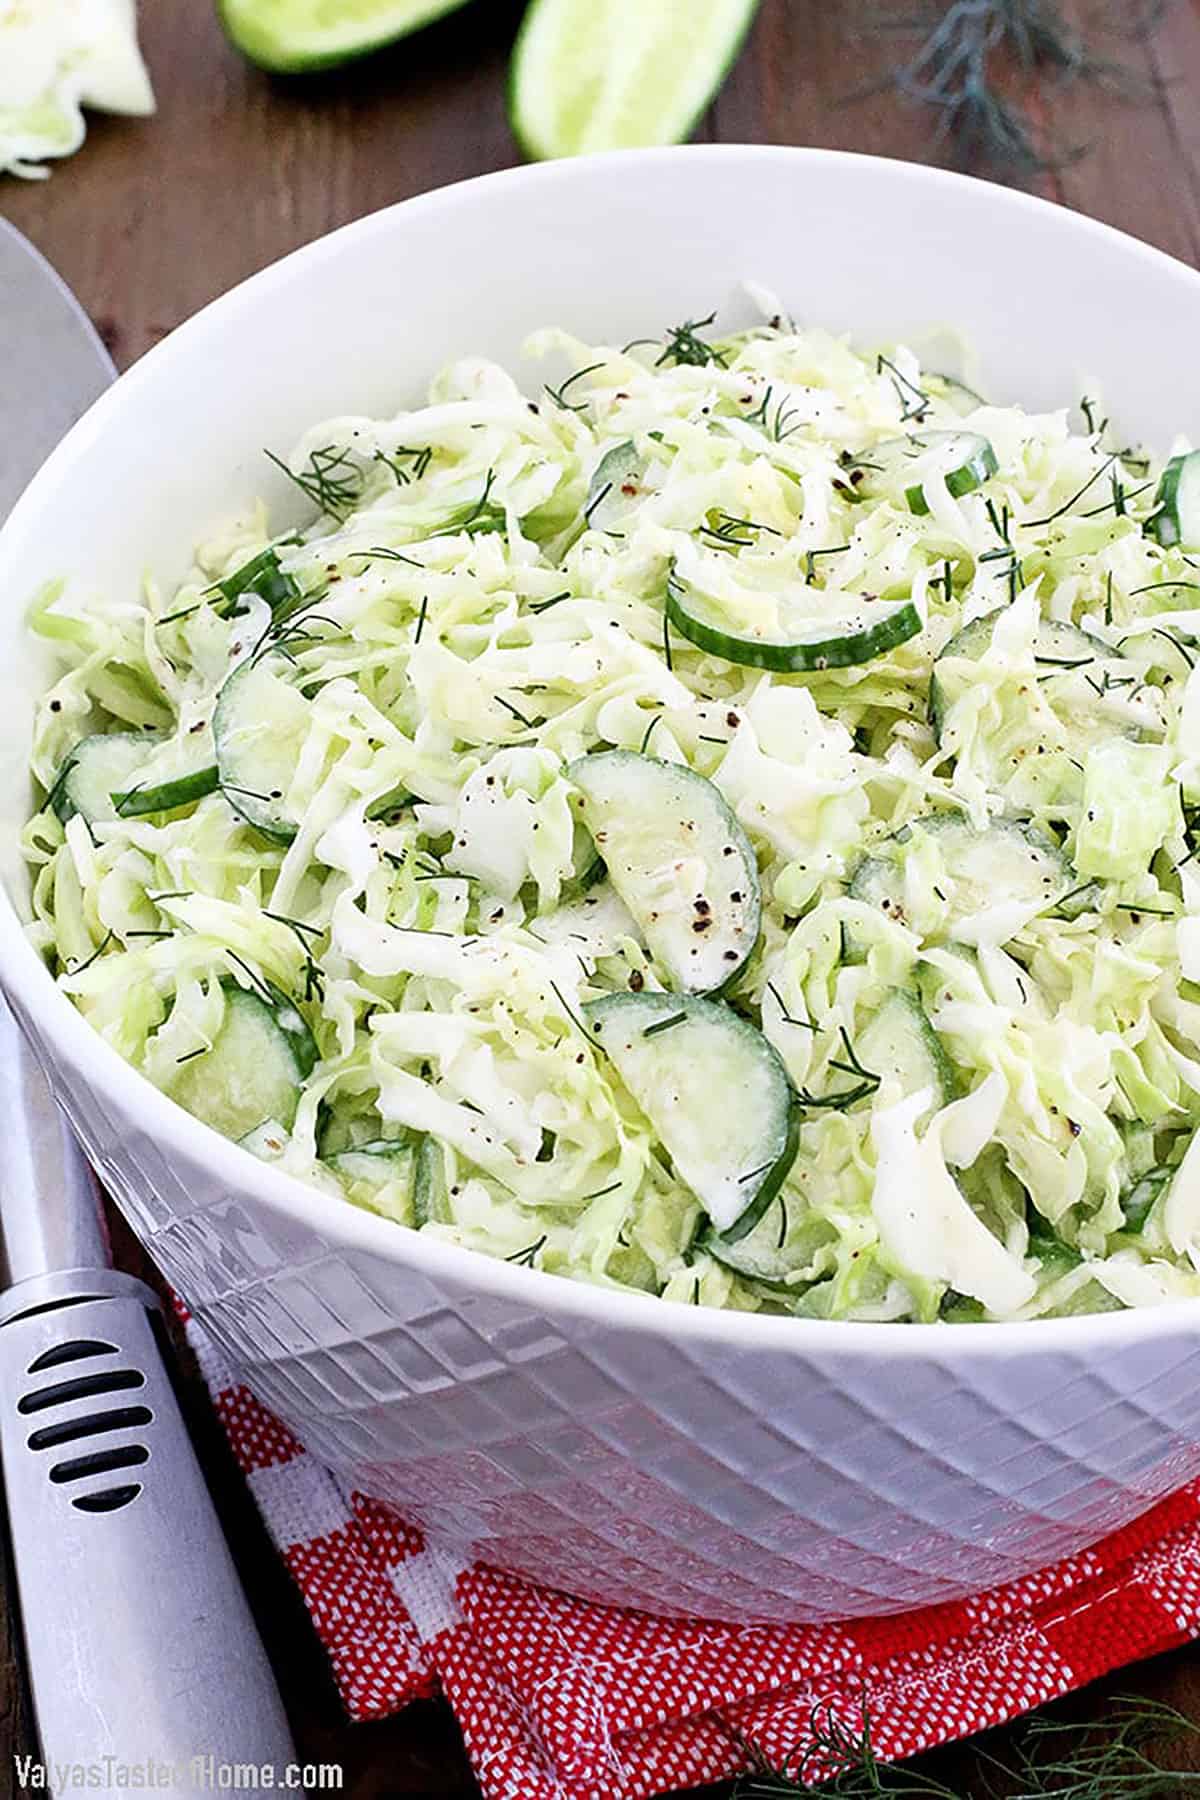 This is the favorite salad that my children love! Plus, it is so easy to make with having most of the ingredients on hand most of the time. 